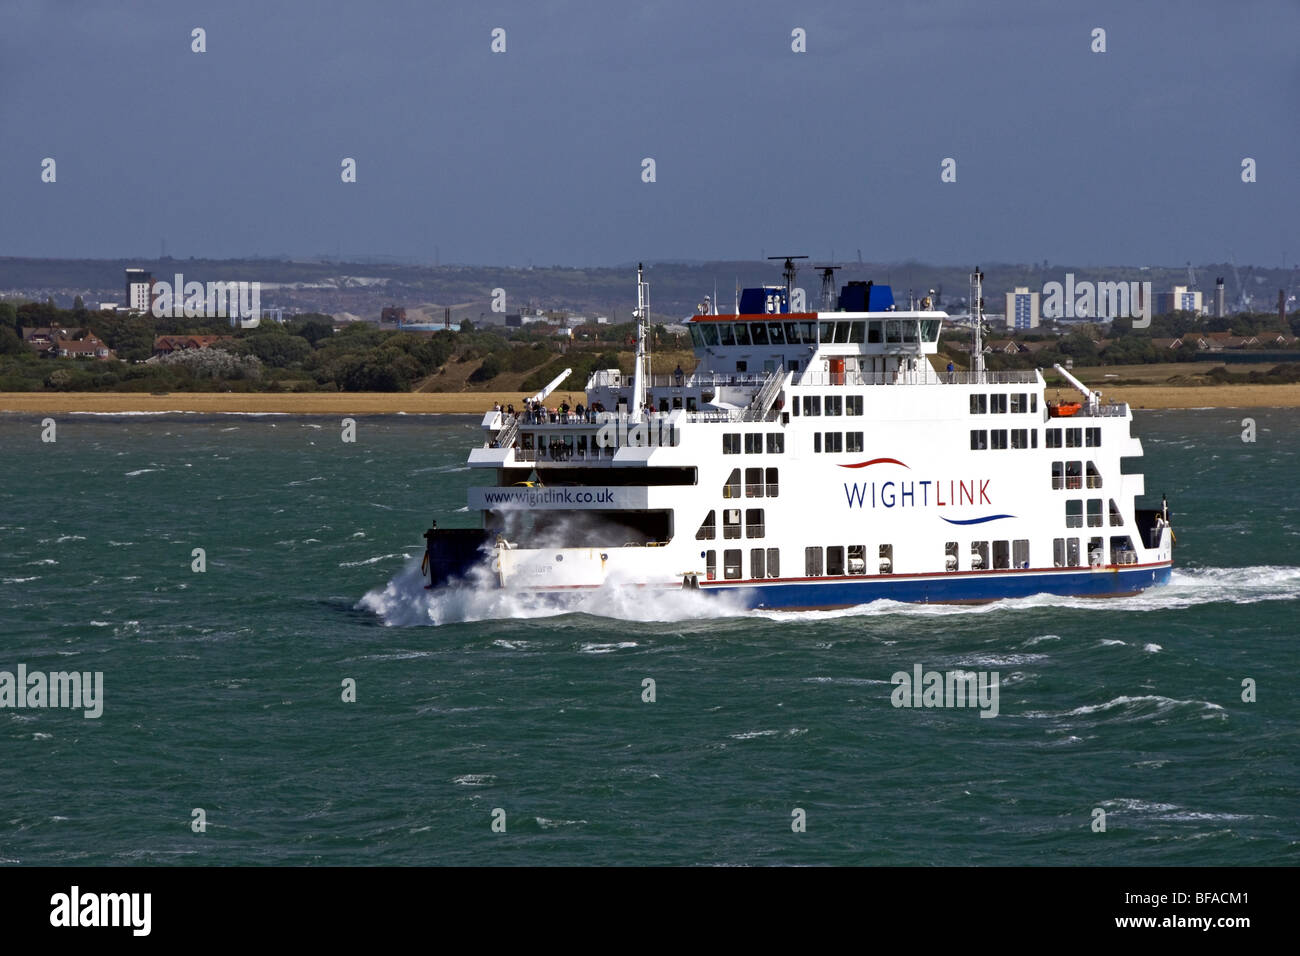 Wightlink Isle of Wight ferry St Clare en route from Portsmouth to Ryde in England Stock Photo